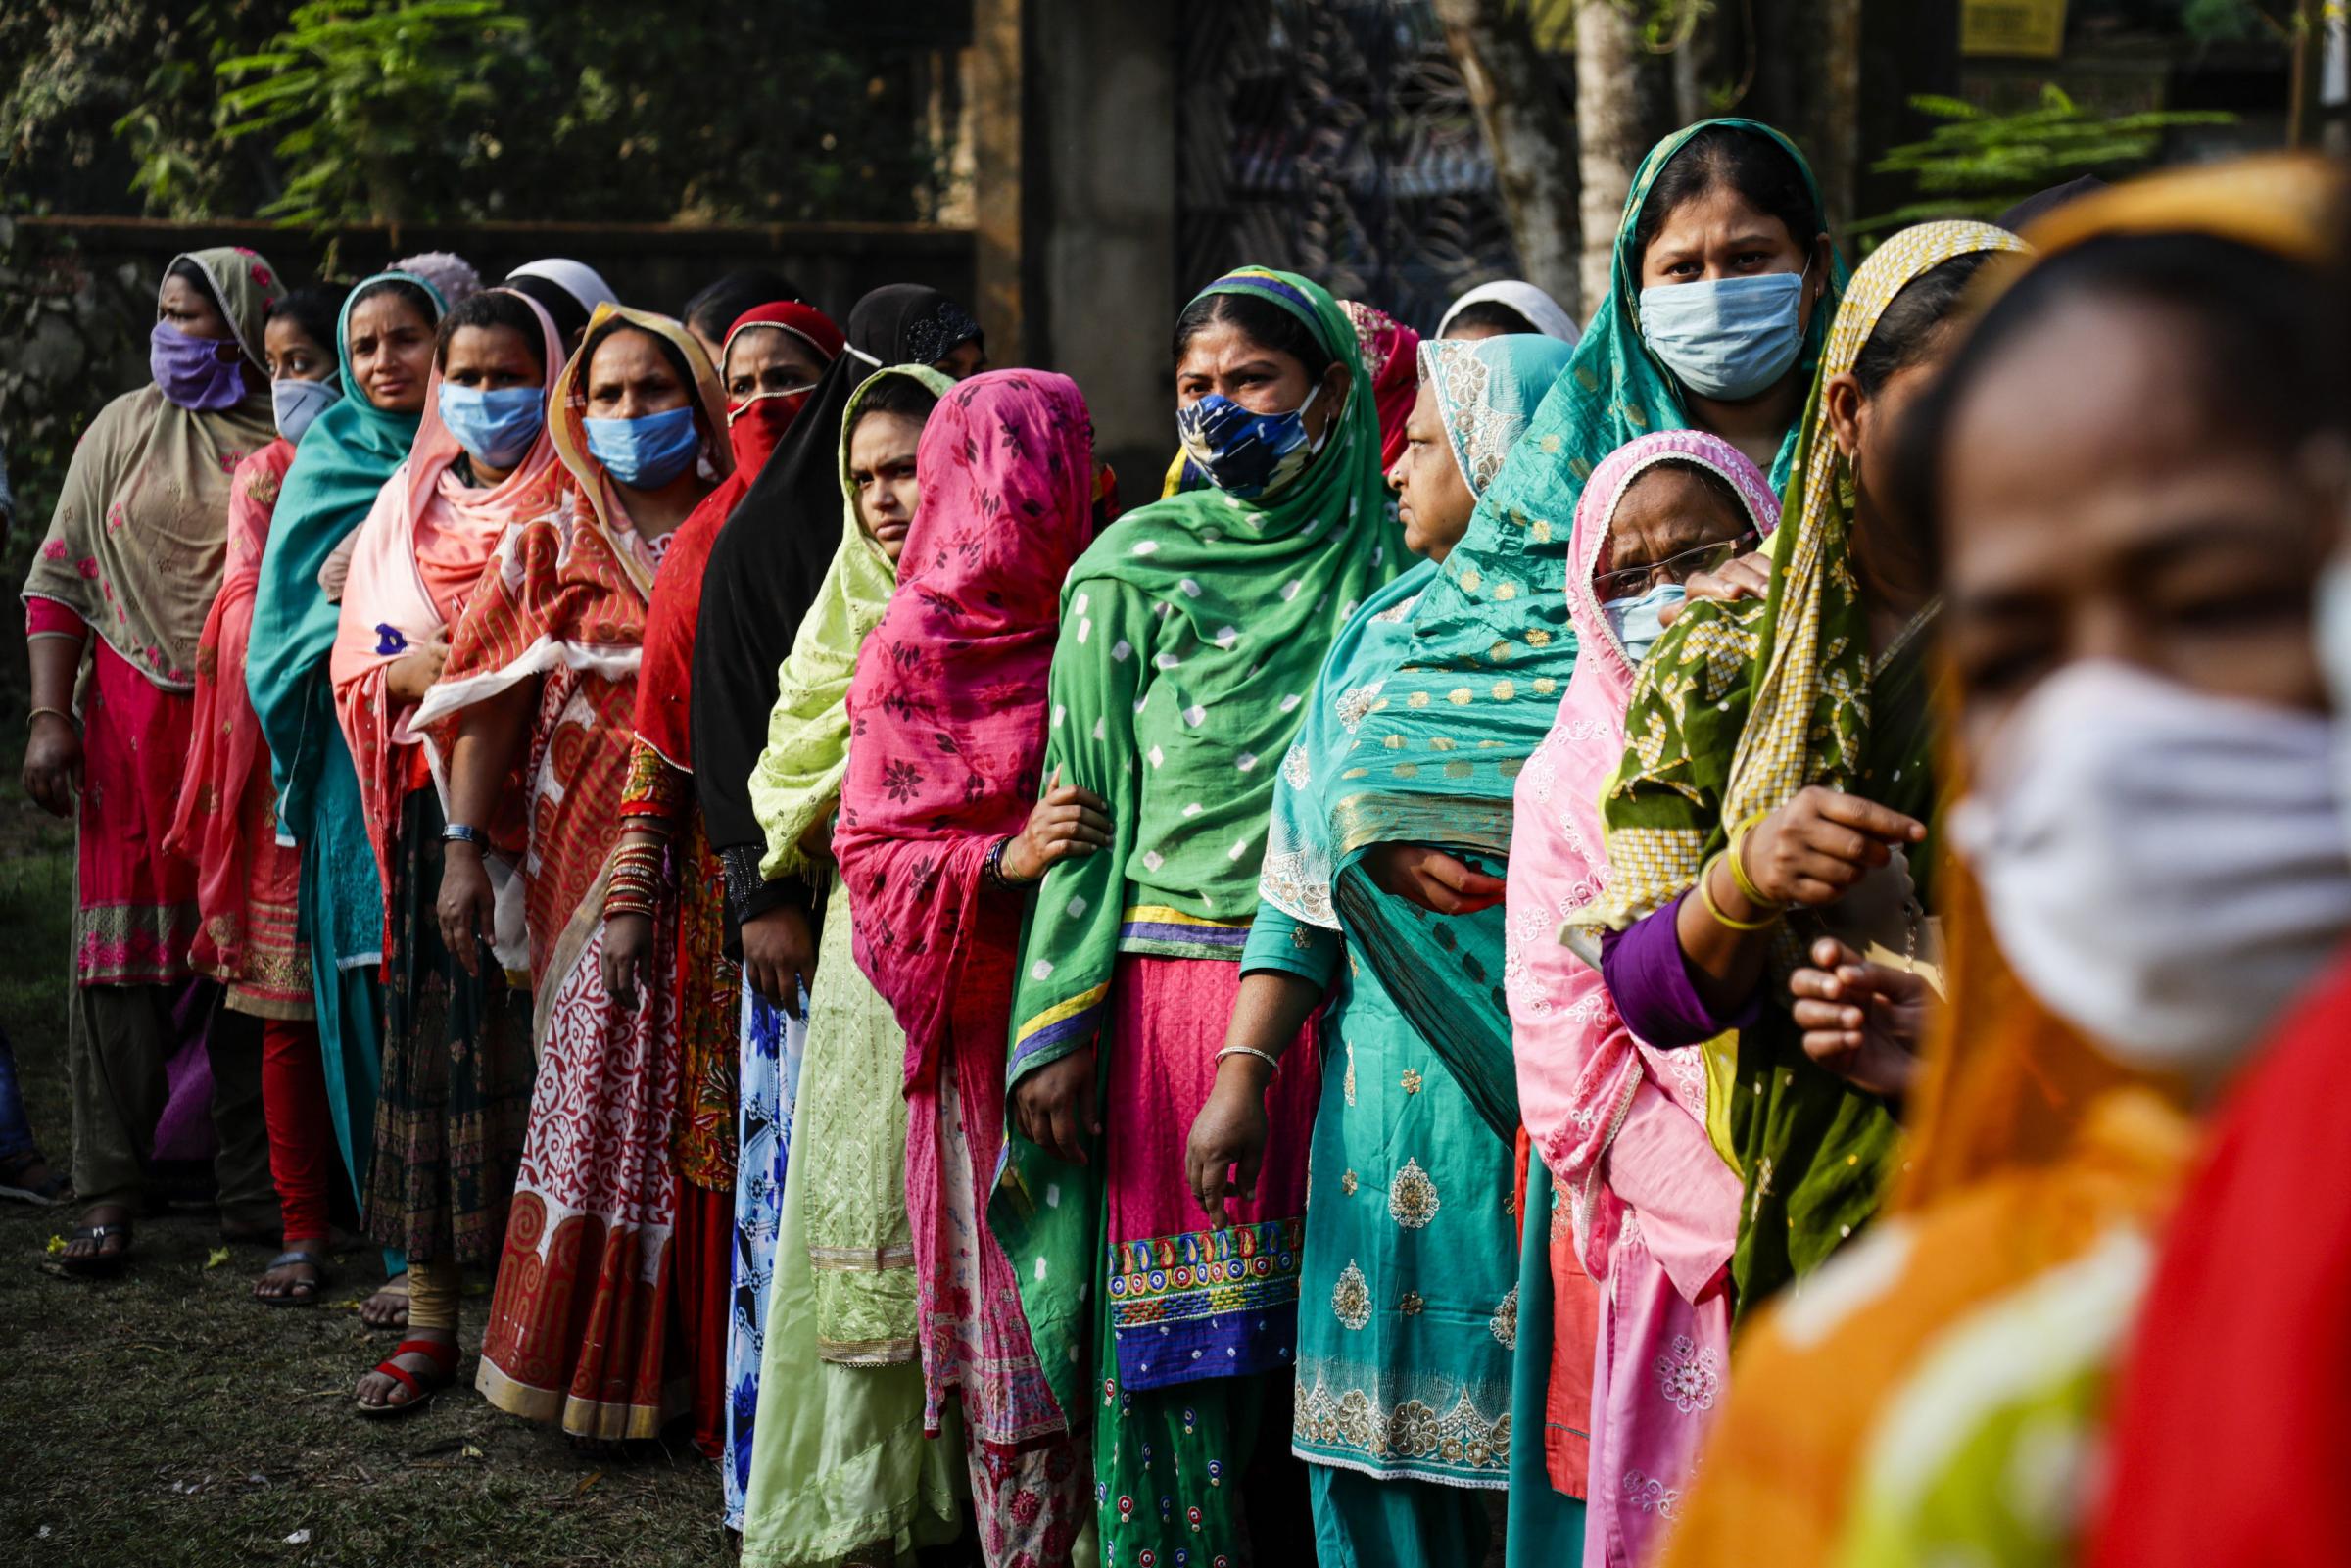 Voters wearing masks as a precaution against the coronavirus stand in queue to cast their votes at a polling booth during third phase of West Bengal state elections in Baruipur, South 24 Pargana district, India Picture: BIKAS DAS/AP.